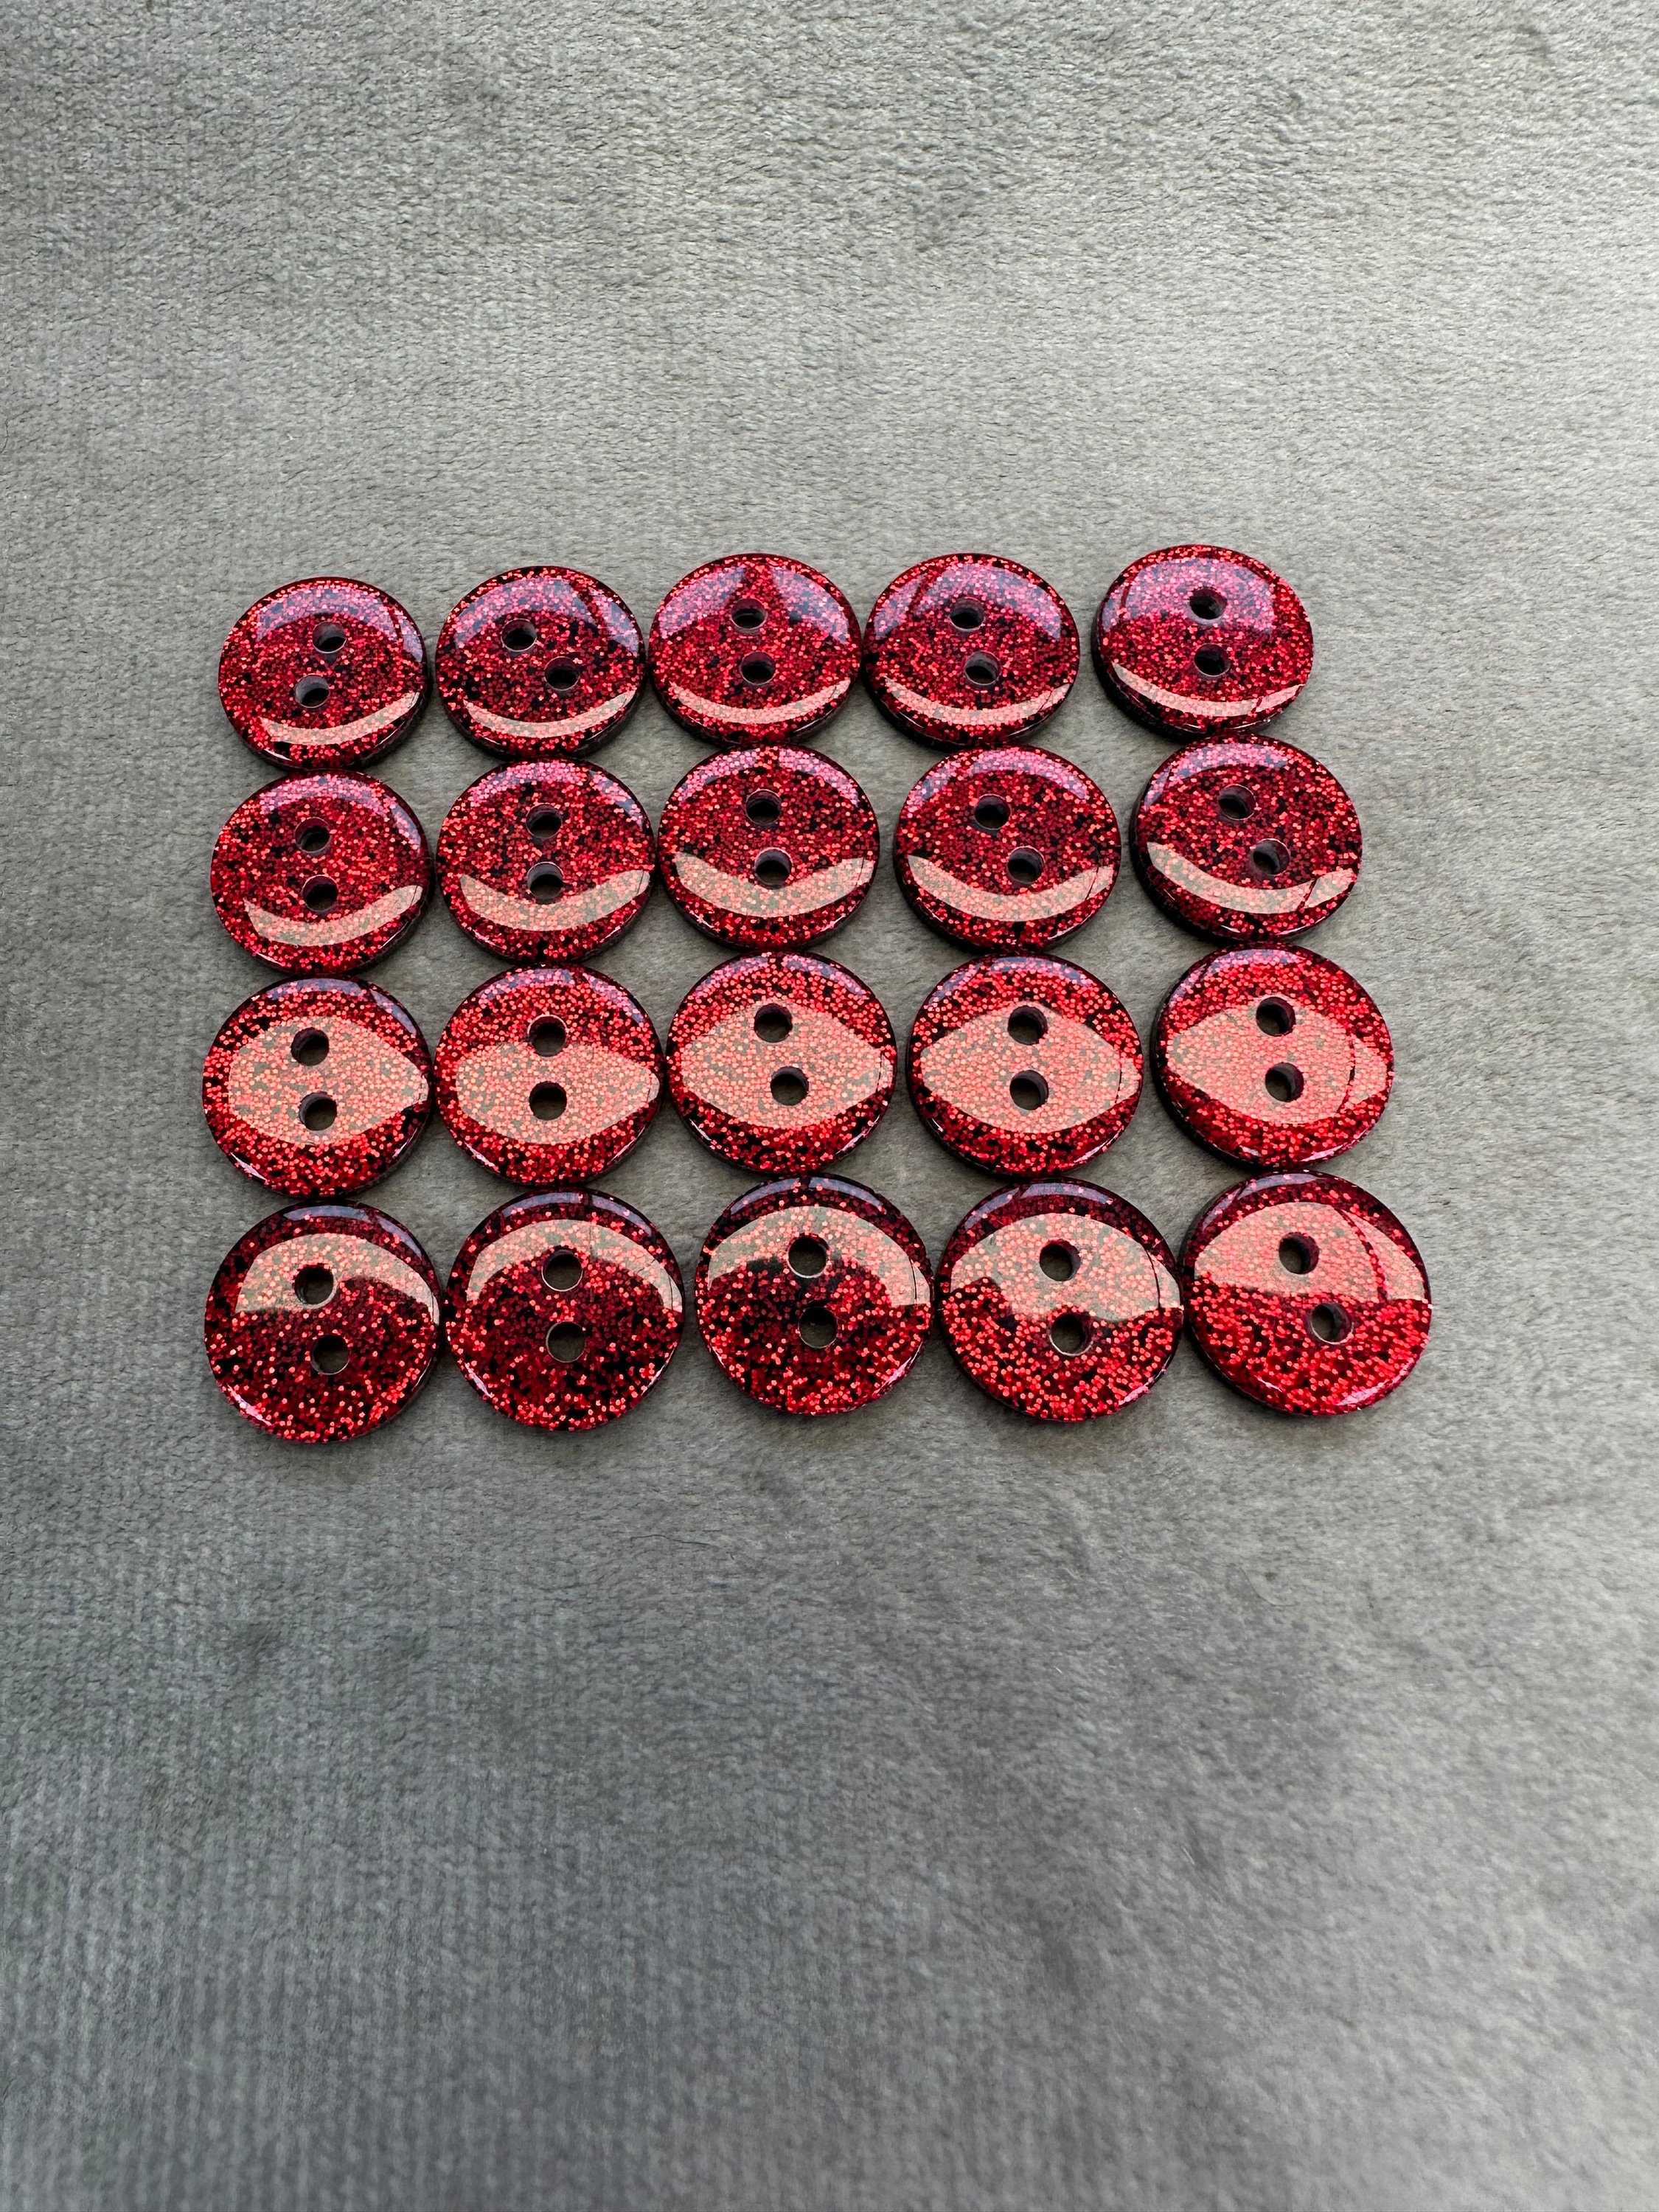 10 x anchor red buttons - 12.5mm - baby/kids craft cards knitting/sewing  b110